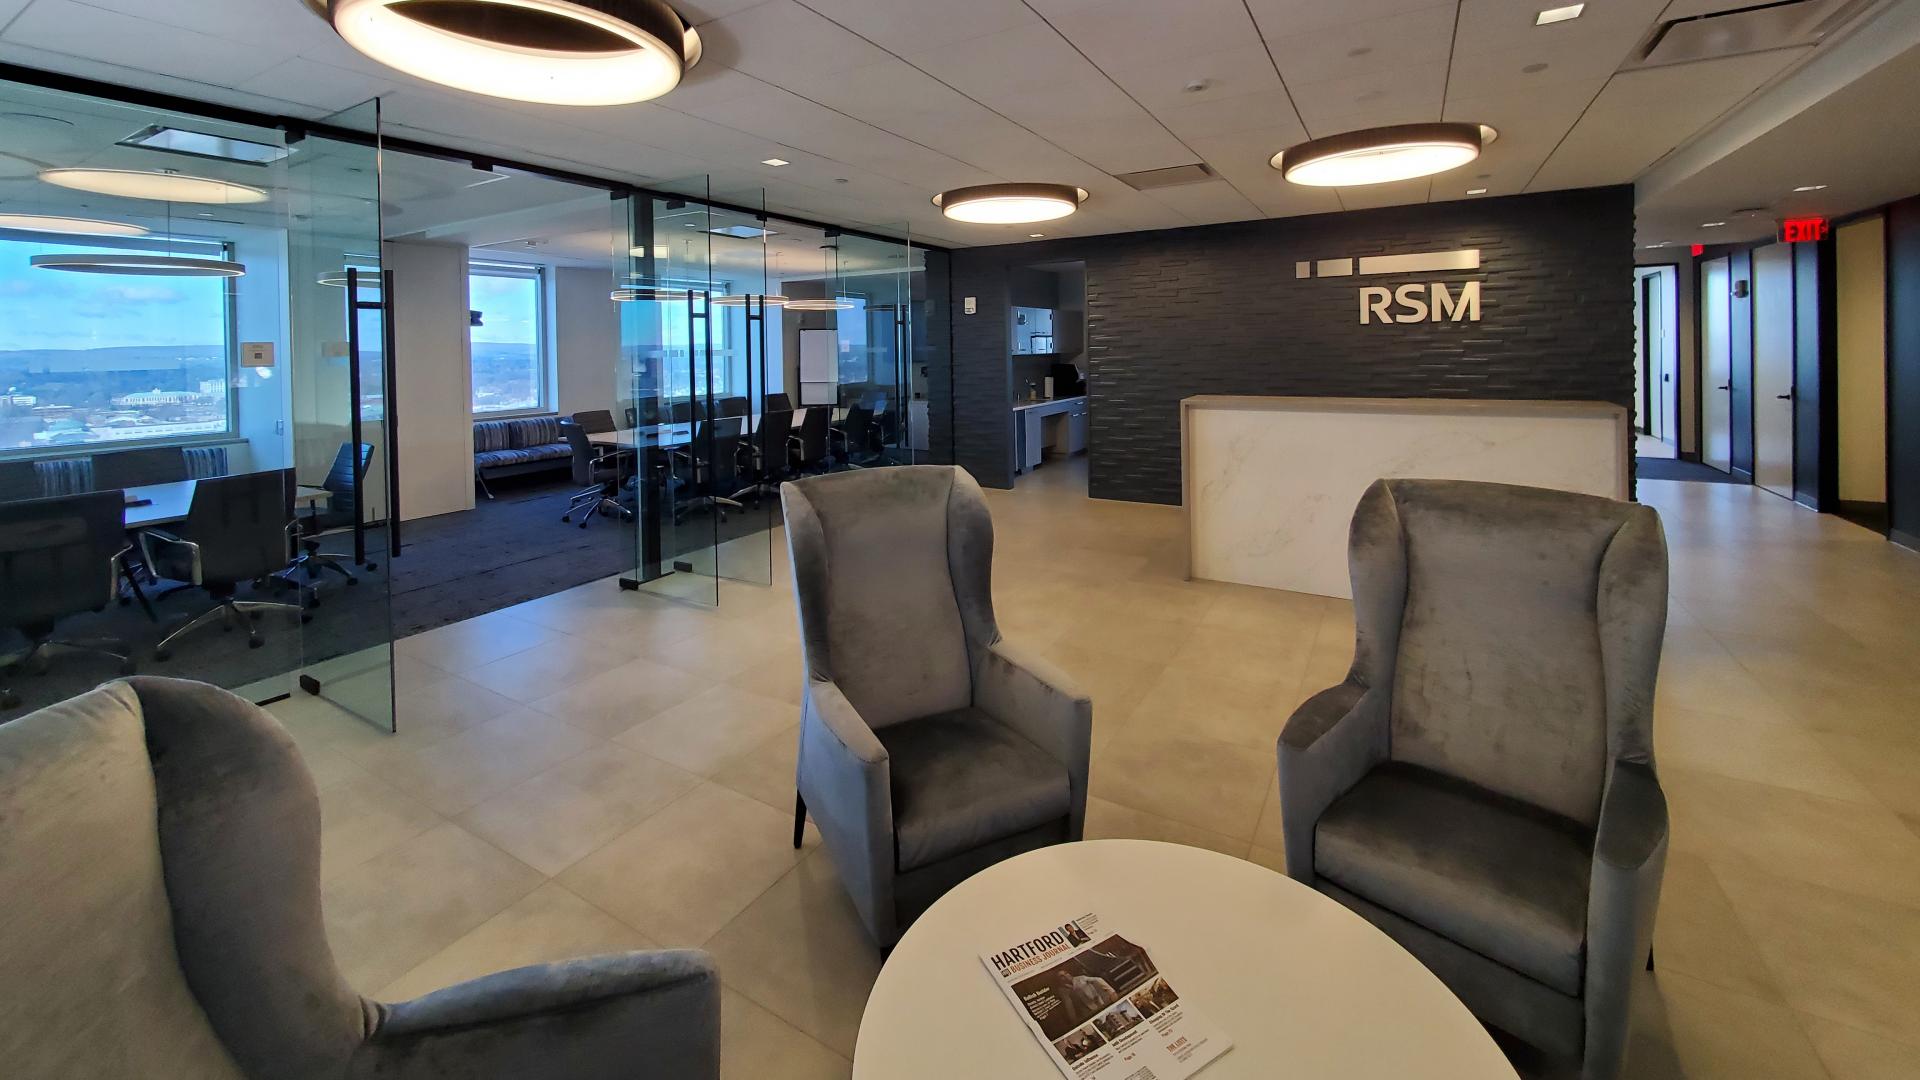 Spacious reception area with access to conference room, private phone booths and amenity spaces